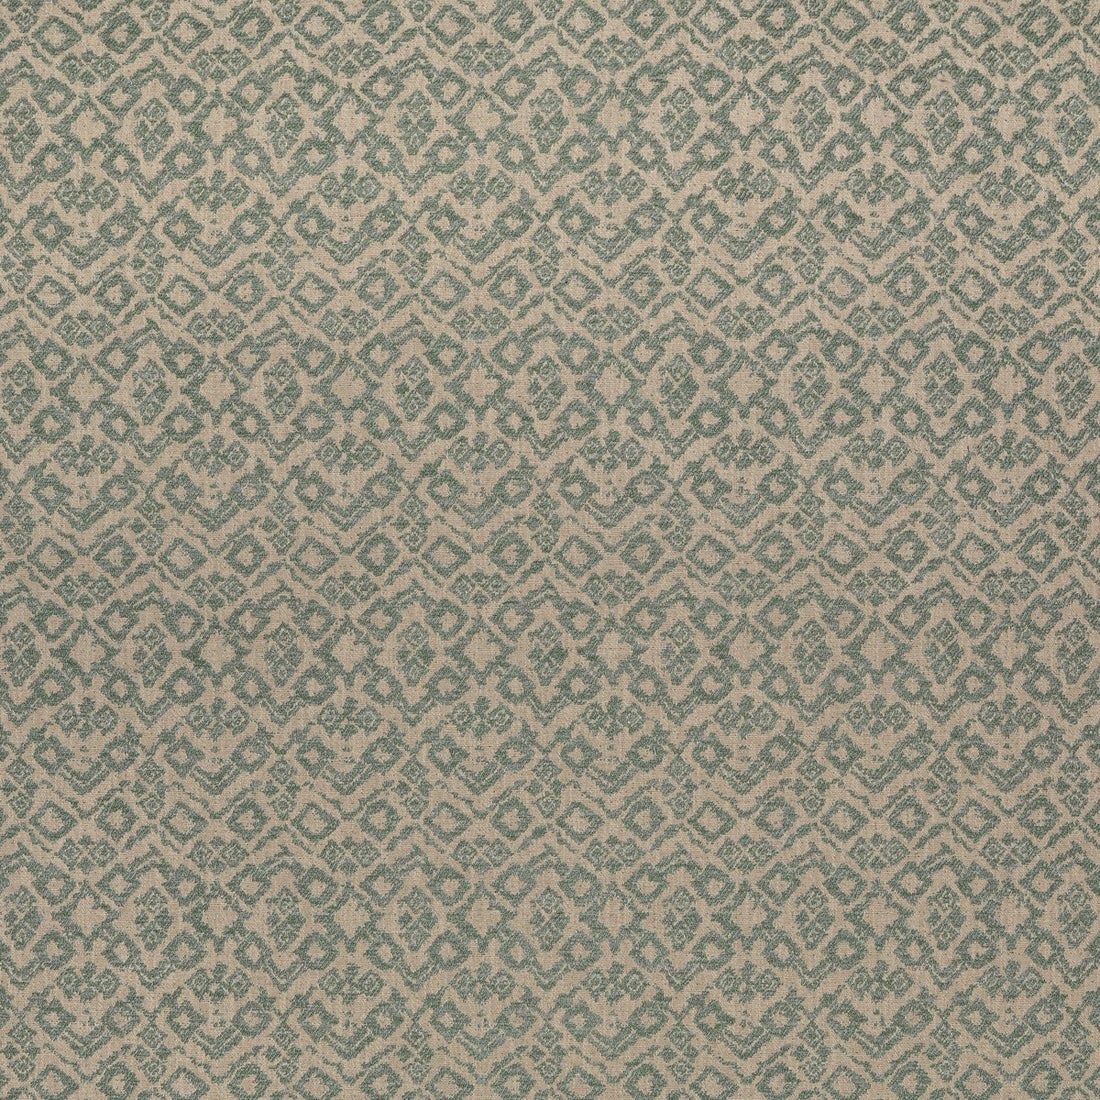 Brooke fabric in aqua color - pattern BFC-3691.13.0 - by Lee Jofa in the Blithfield collection